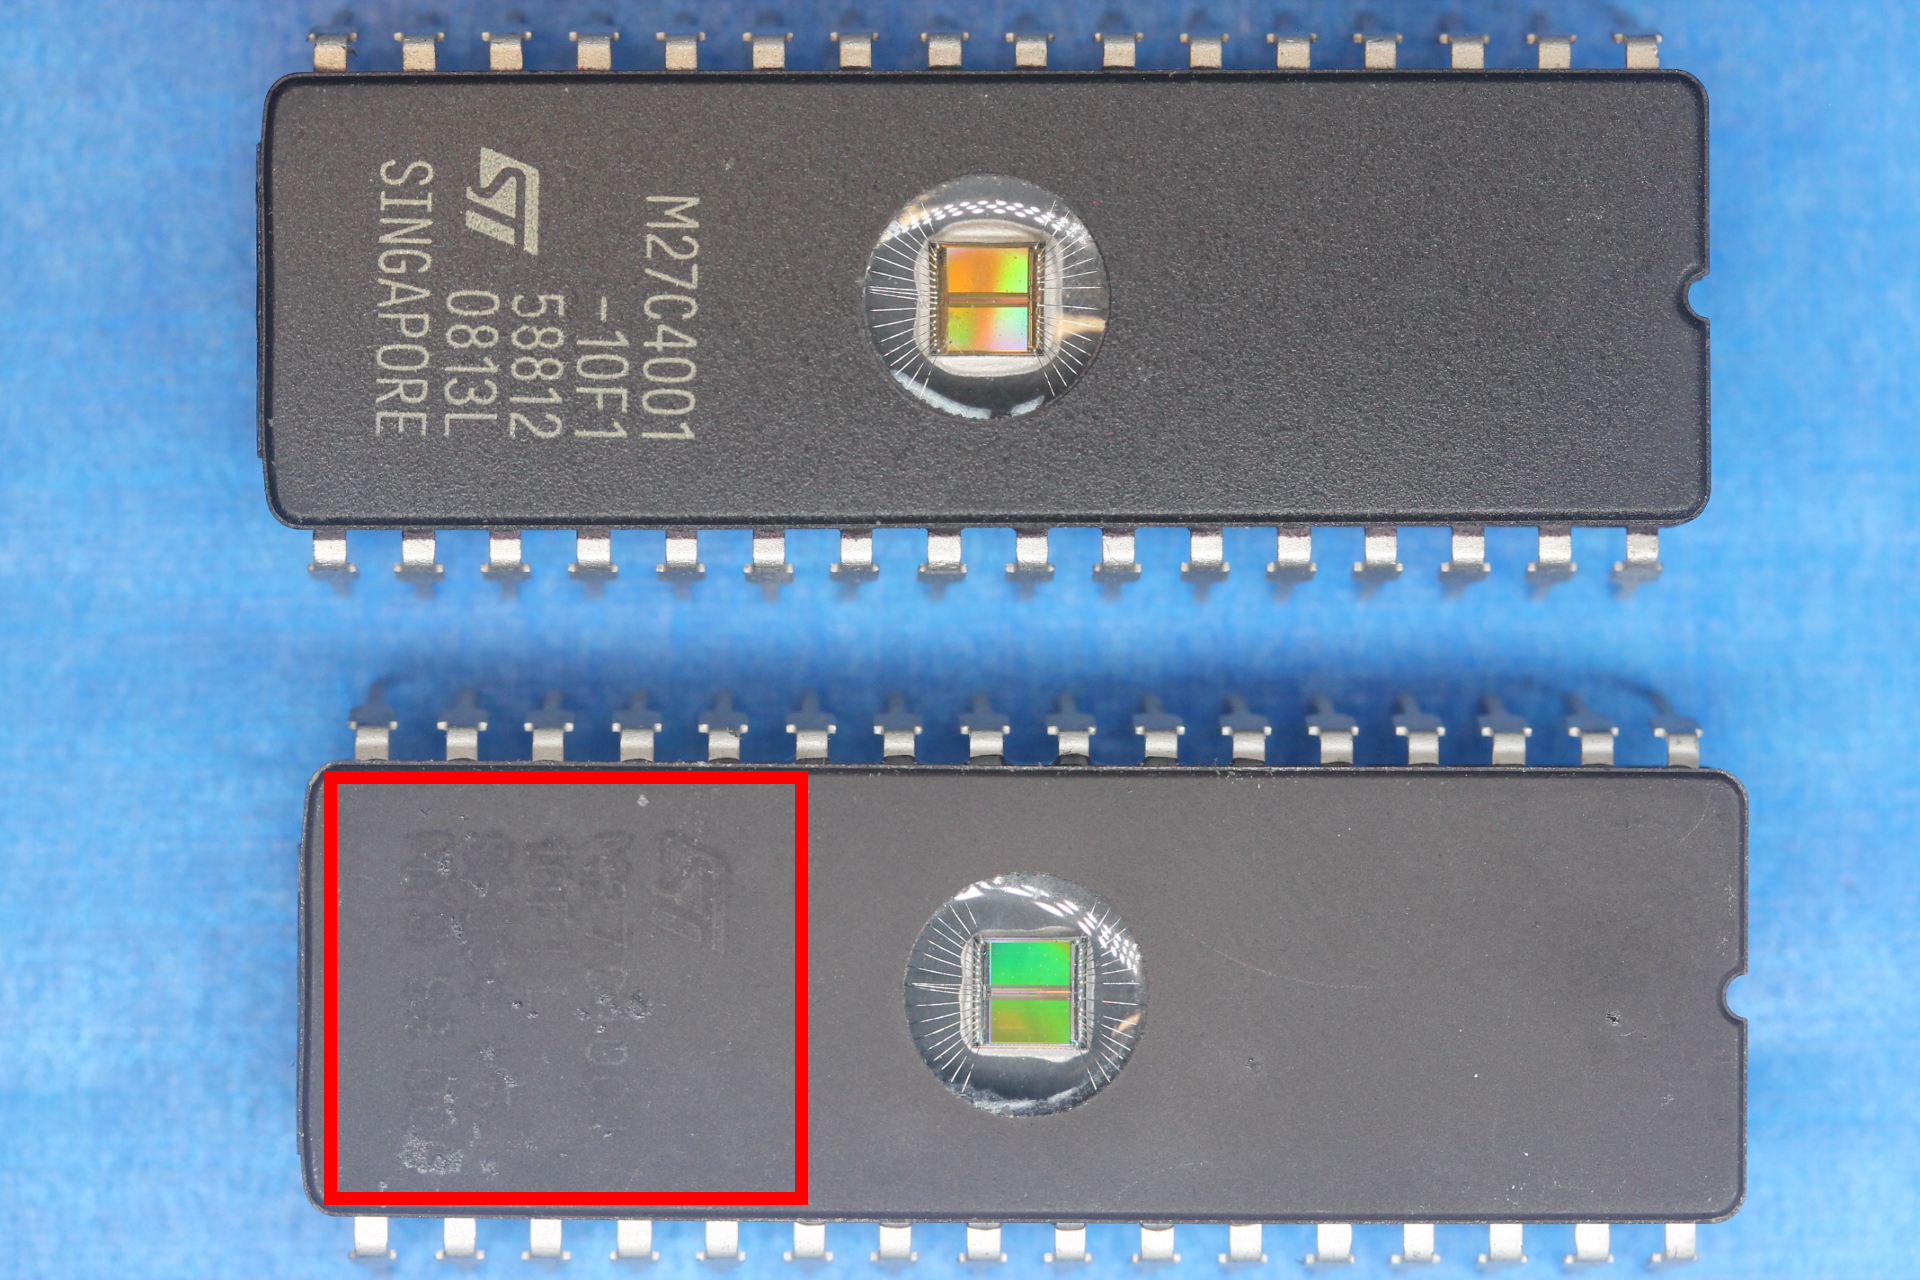 Two similar-looking microchips, one of the microchips clearly shows text that has been covered up in an attempt to hide it.